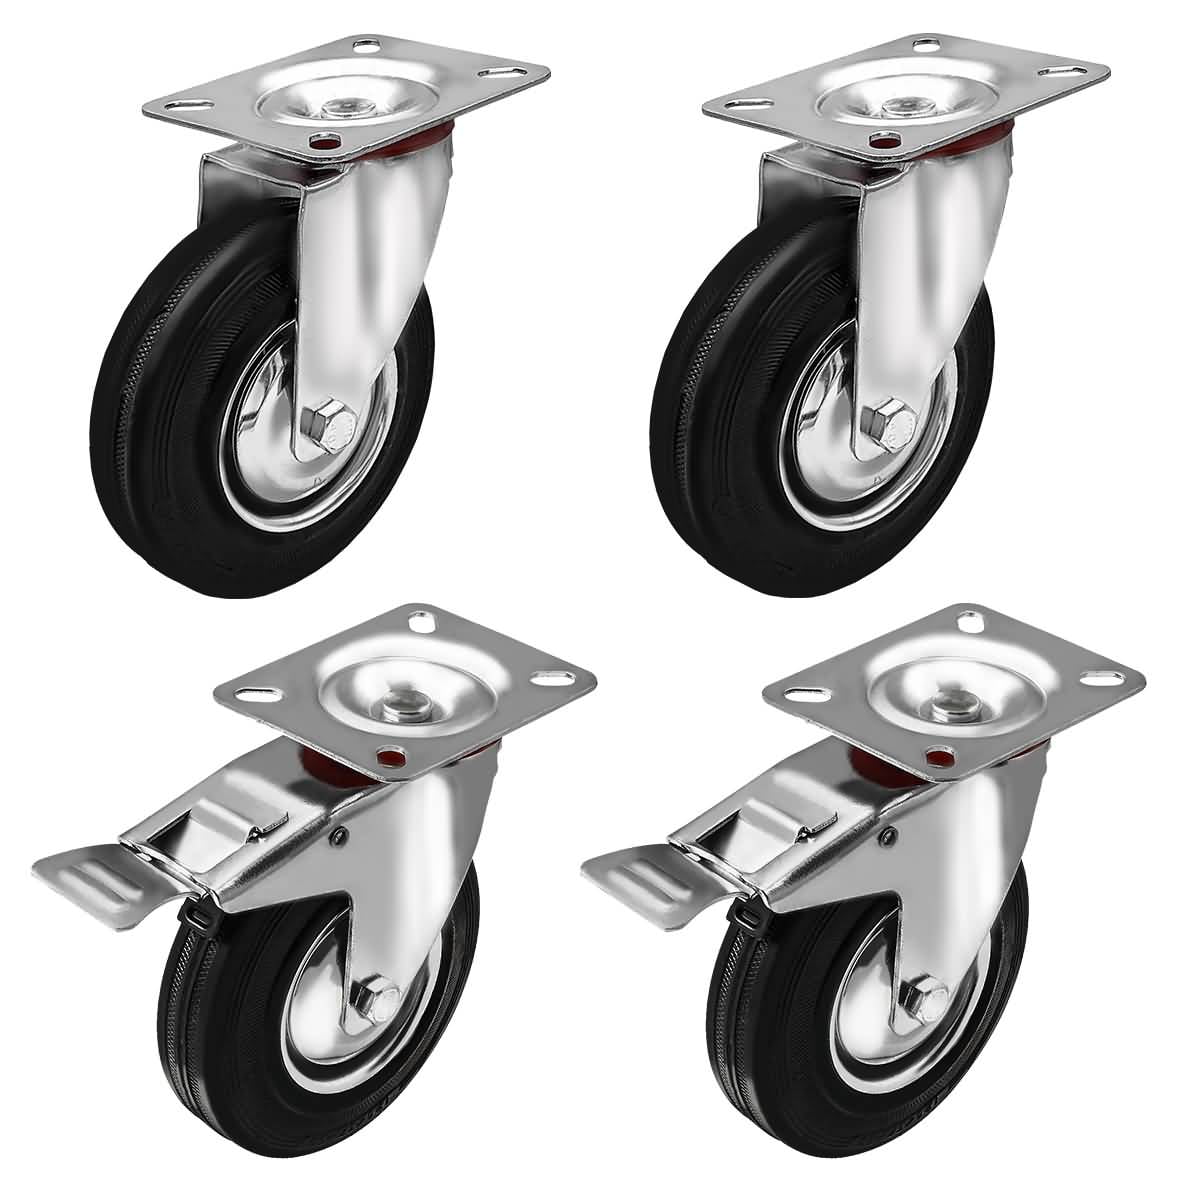 Details about   4 Pack 5" Heavy Duty Caster Swivel Top Plate Black Rubber No Brake Wheels 